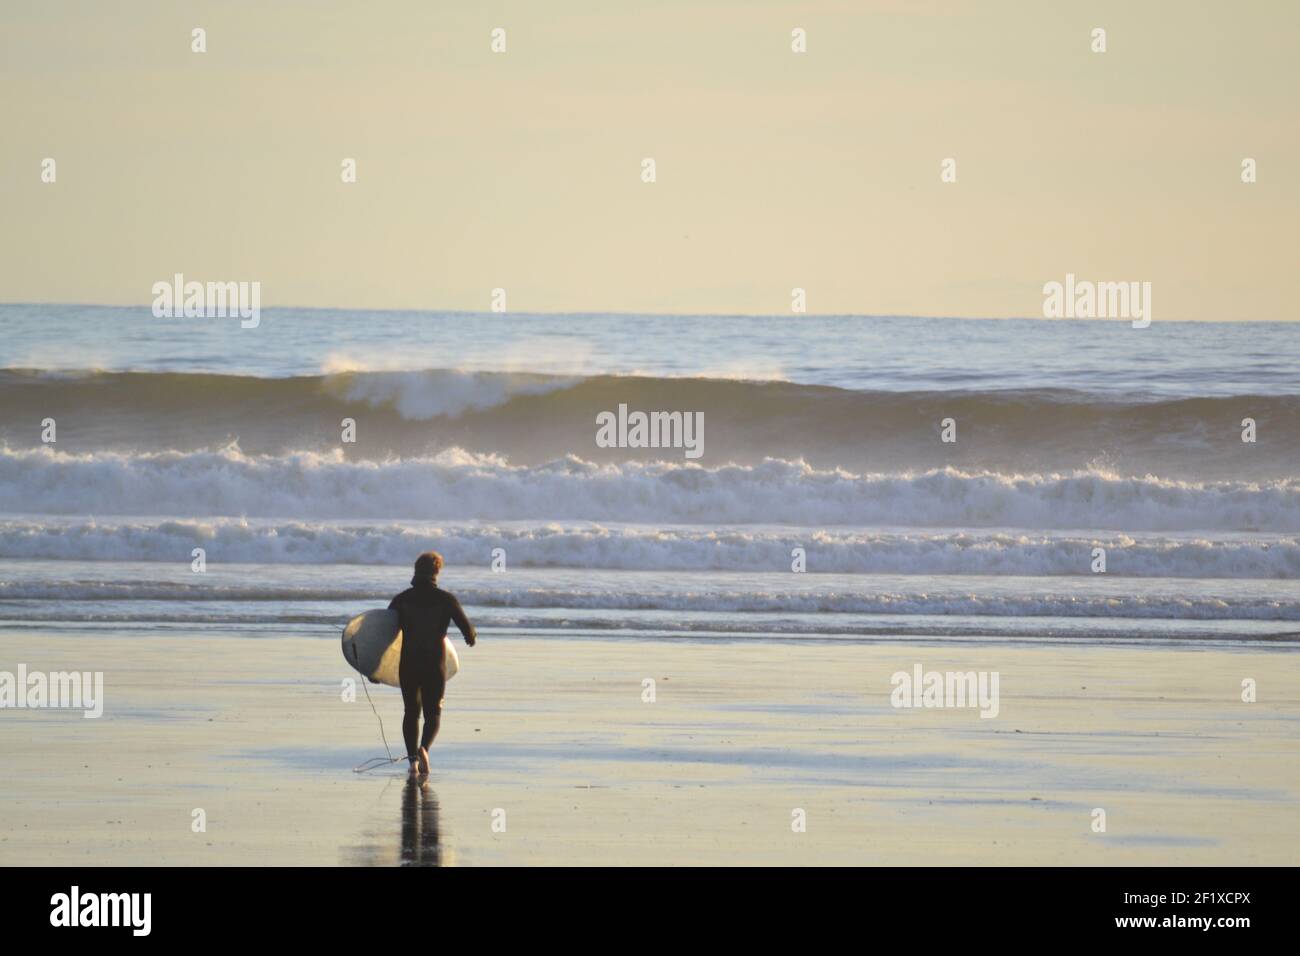 Lone surfer boy heading out for a wave. Stock Photo